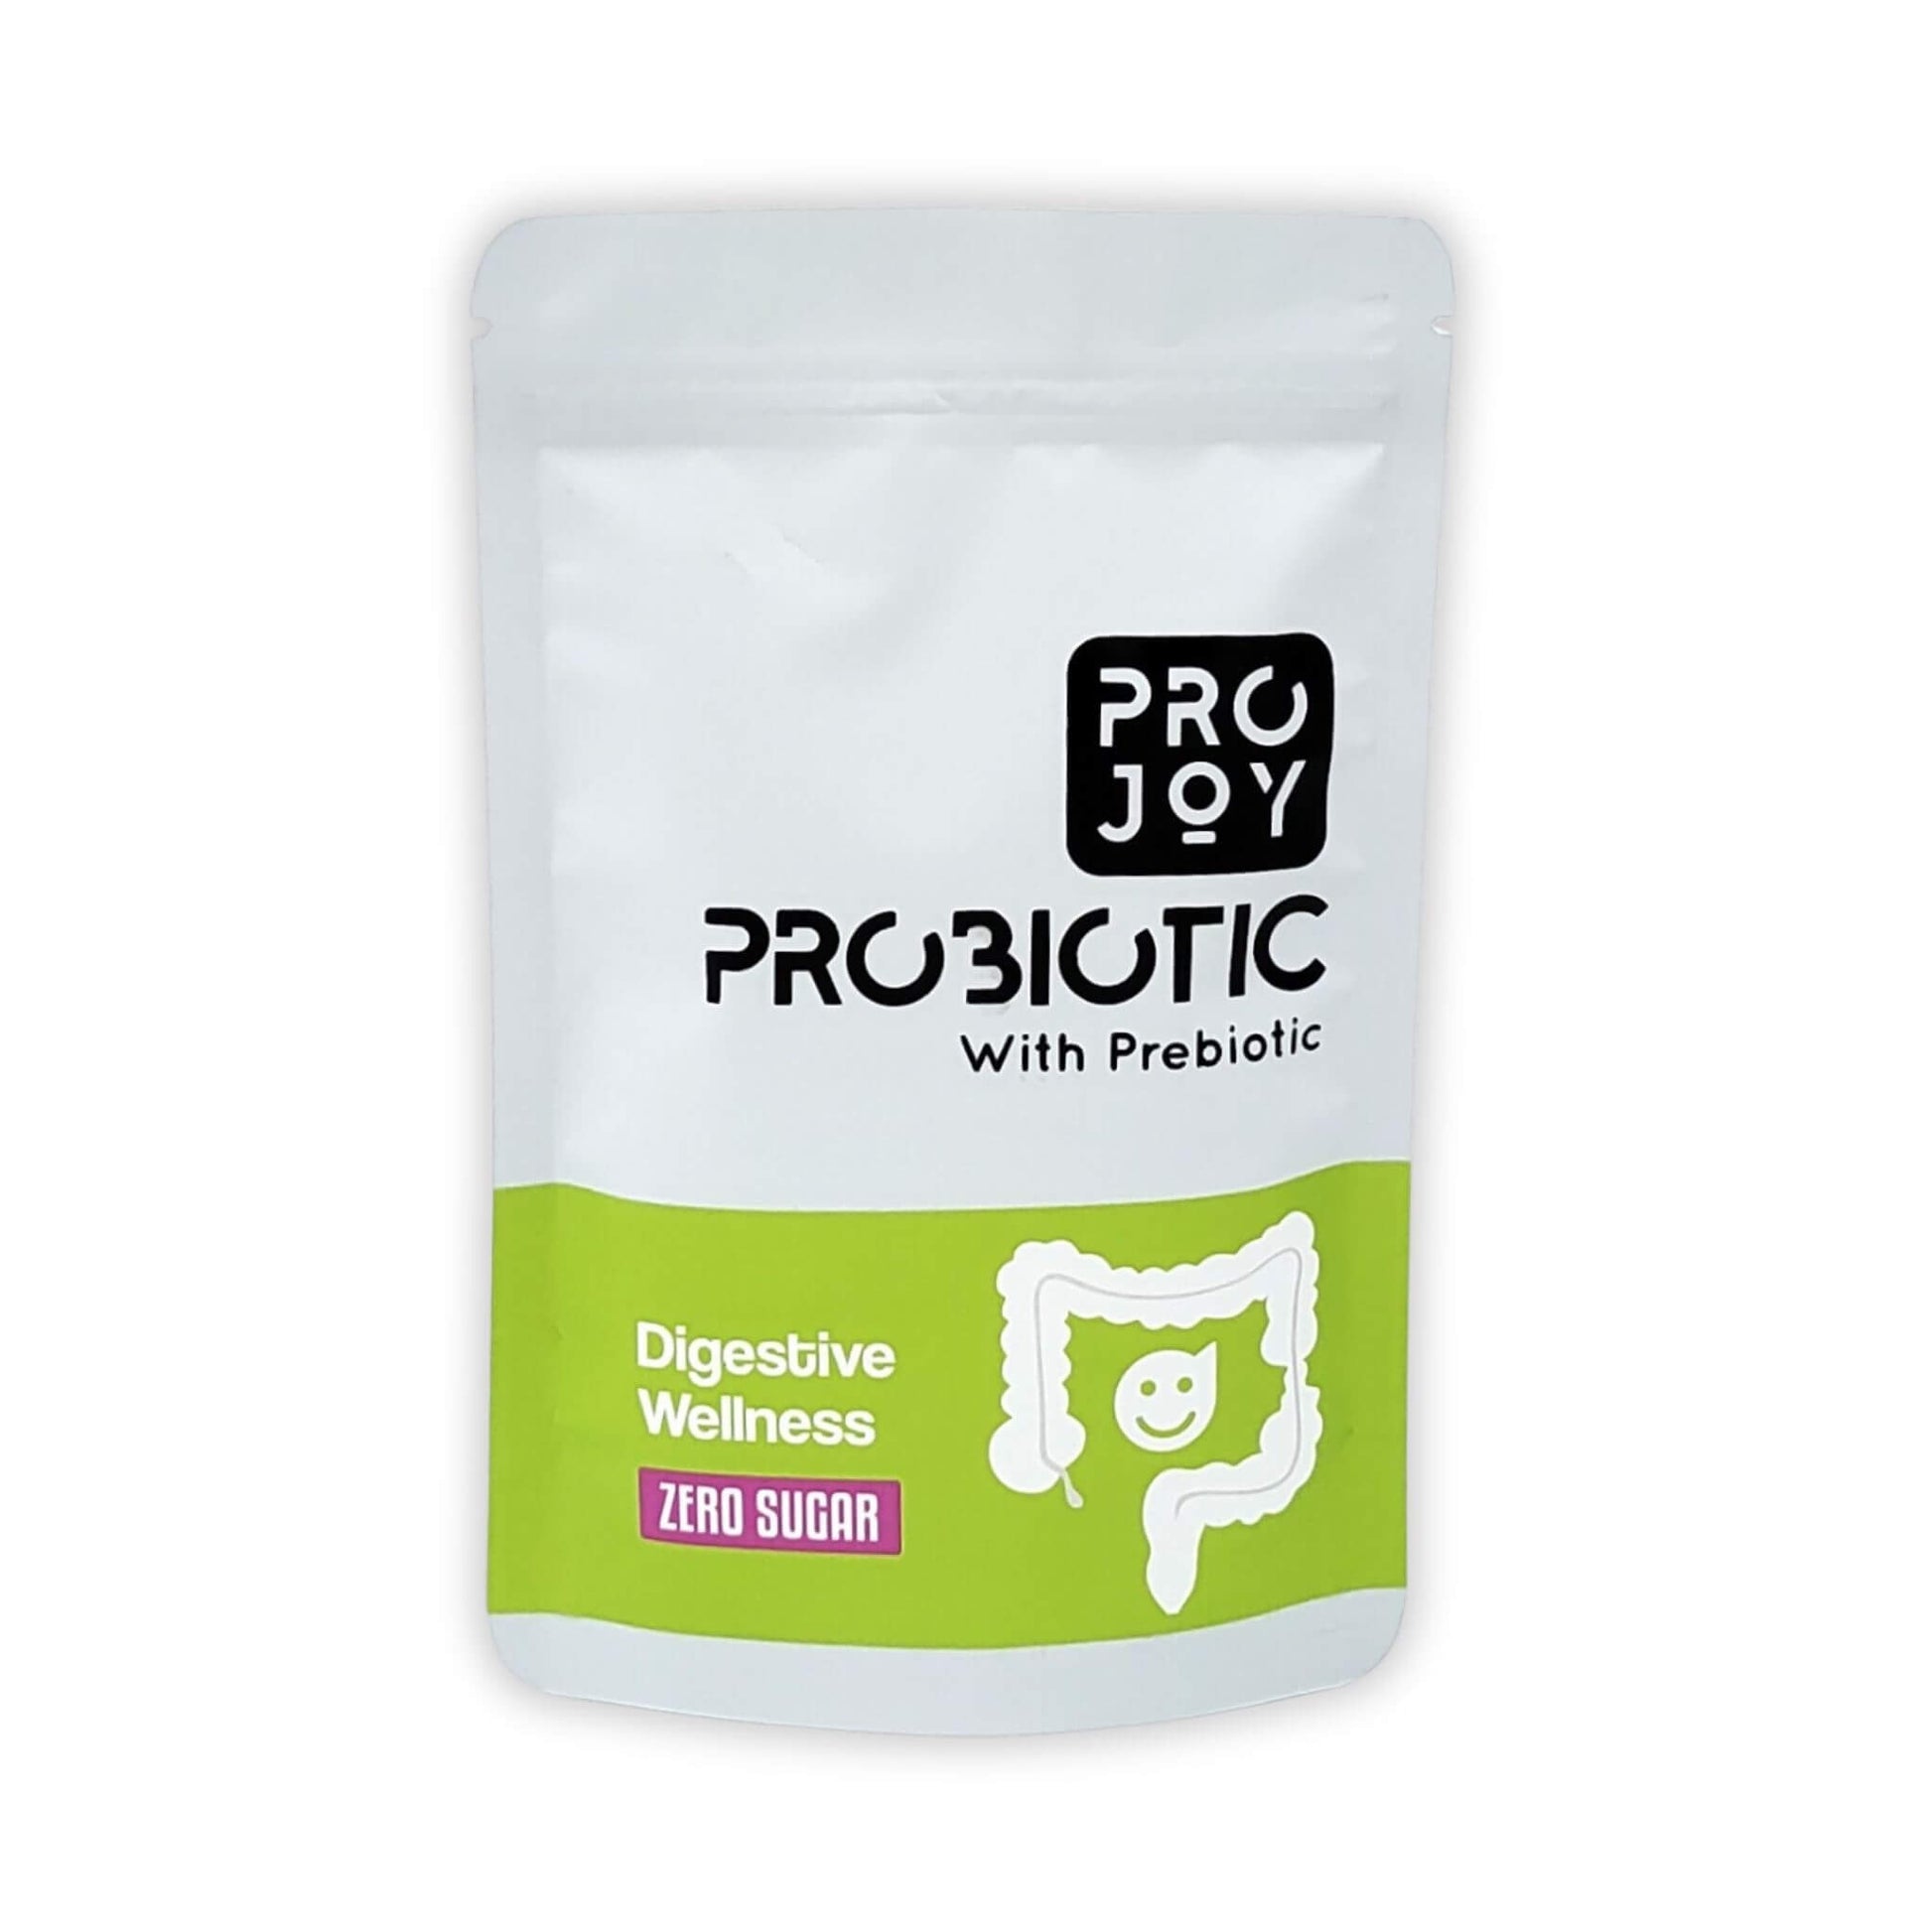 Projoy Probiotic Food Supplement Powder in a Standup Pouch for Improved Digestive Health" - The image may show a standup pouch package of Projoy probiotic food supplement powder, featuring the product name and a tagline promoting its benefits for digestive health.